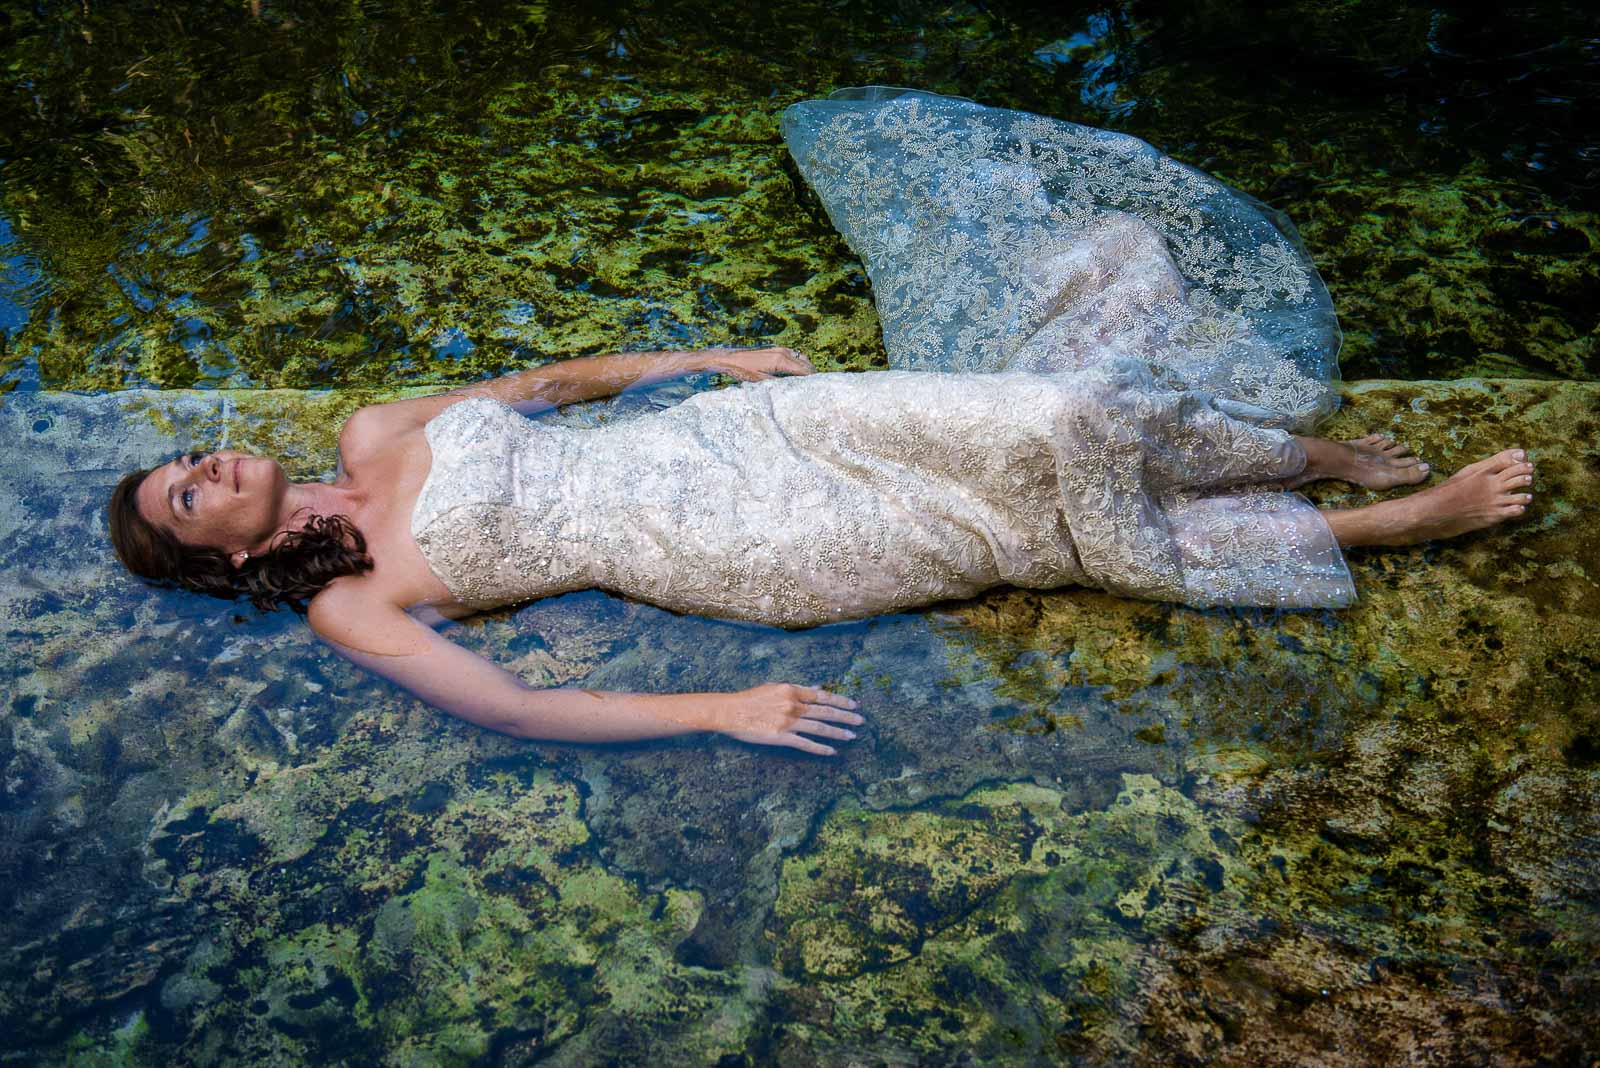 After wedding photography underwater in Mexico